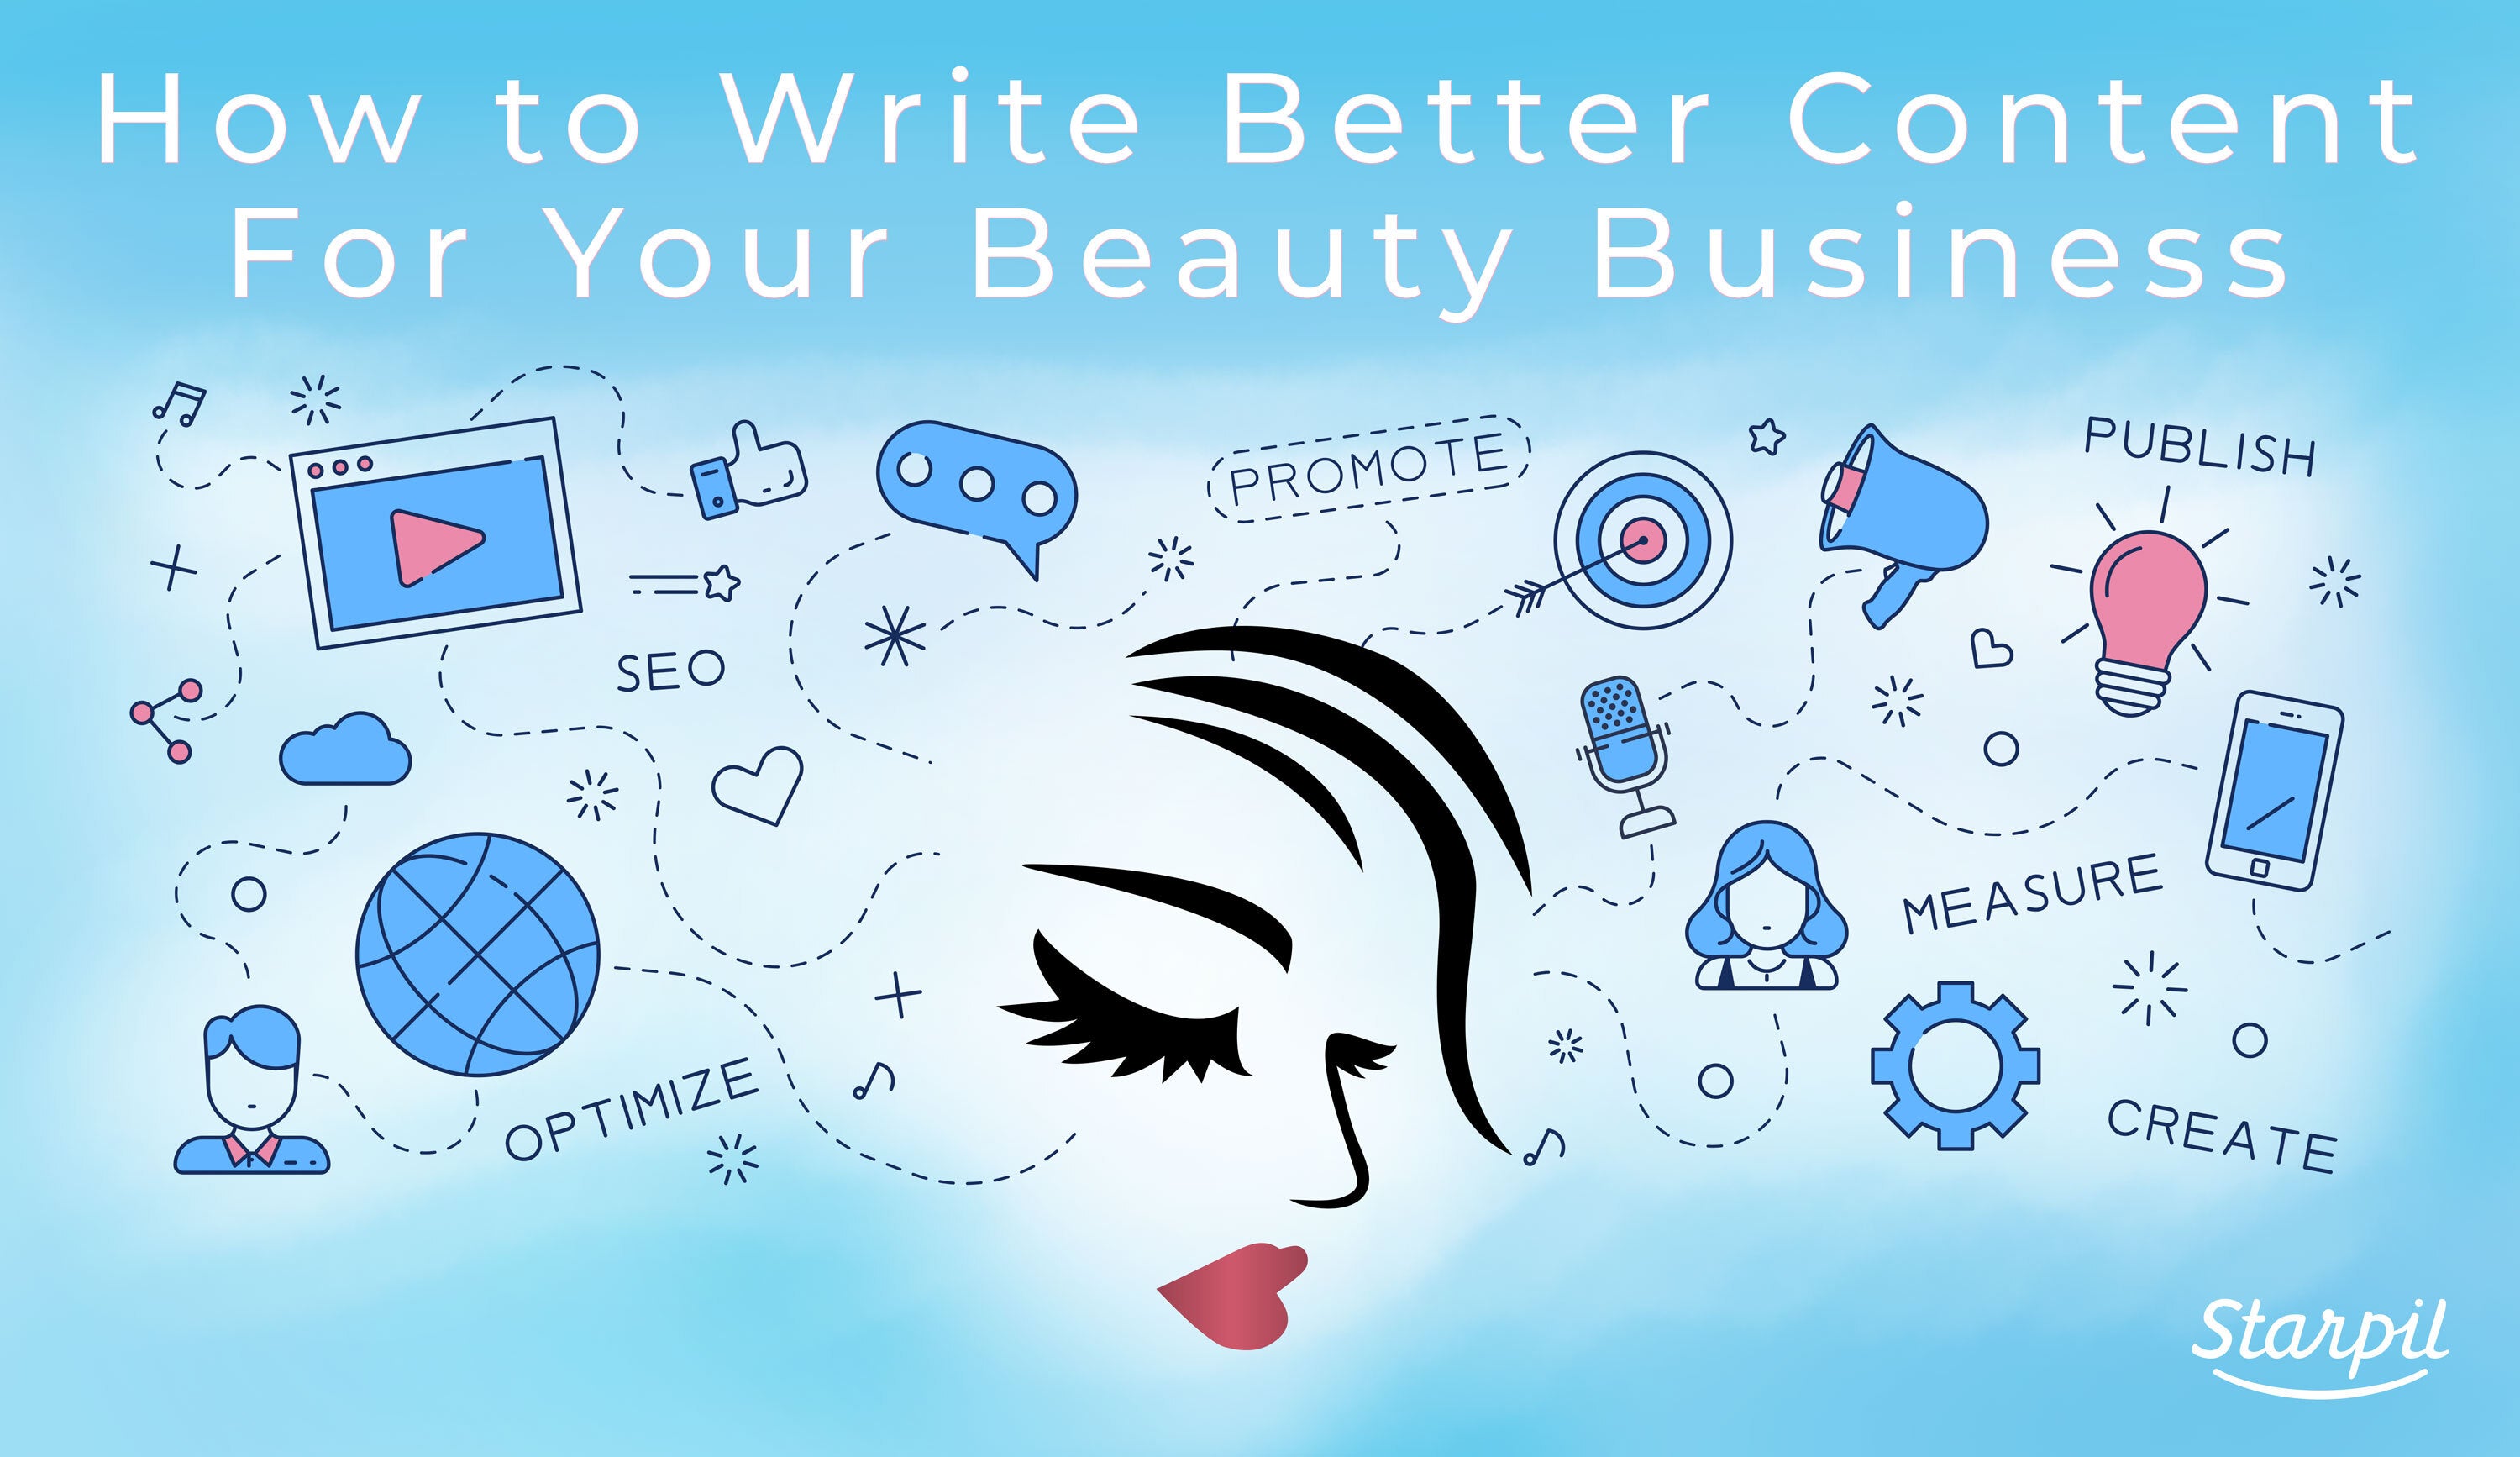 How to Write Better Content for Your Beauty Business